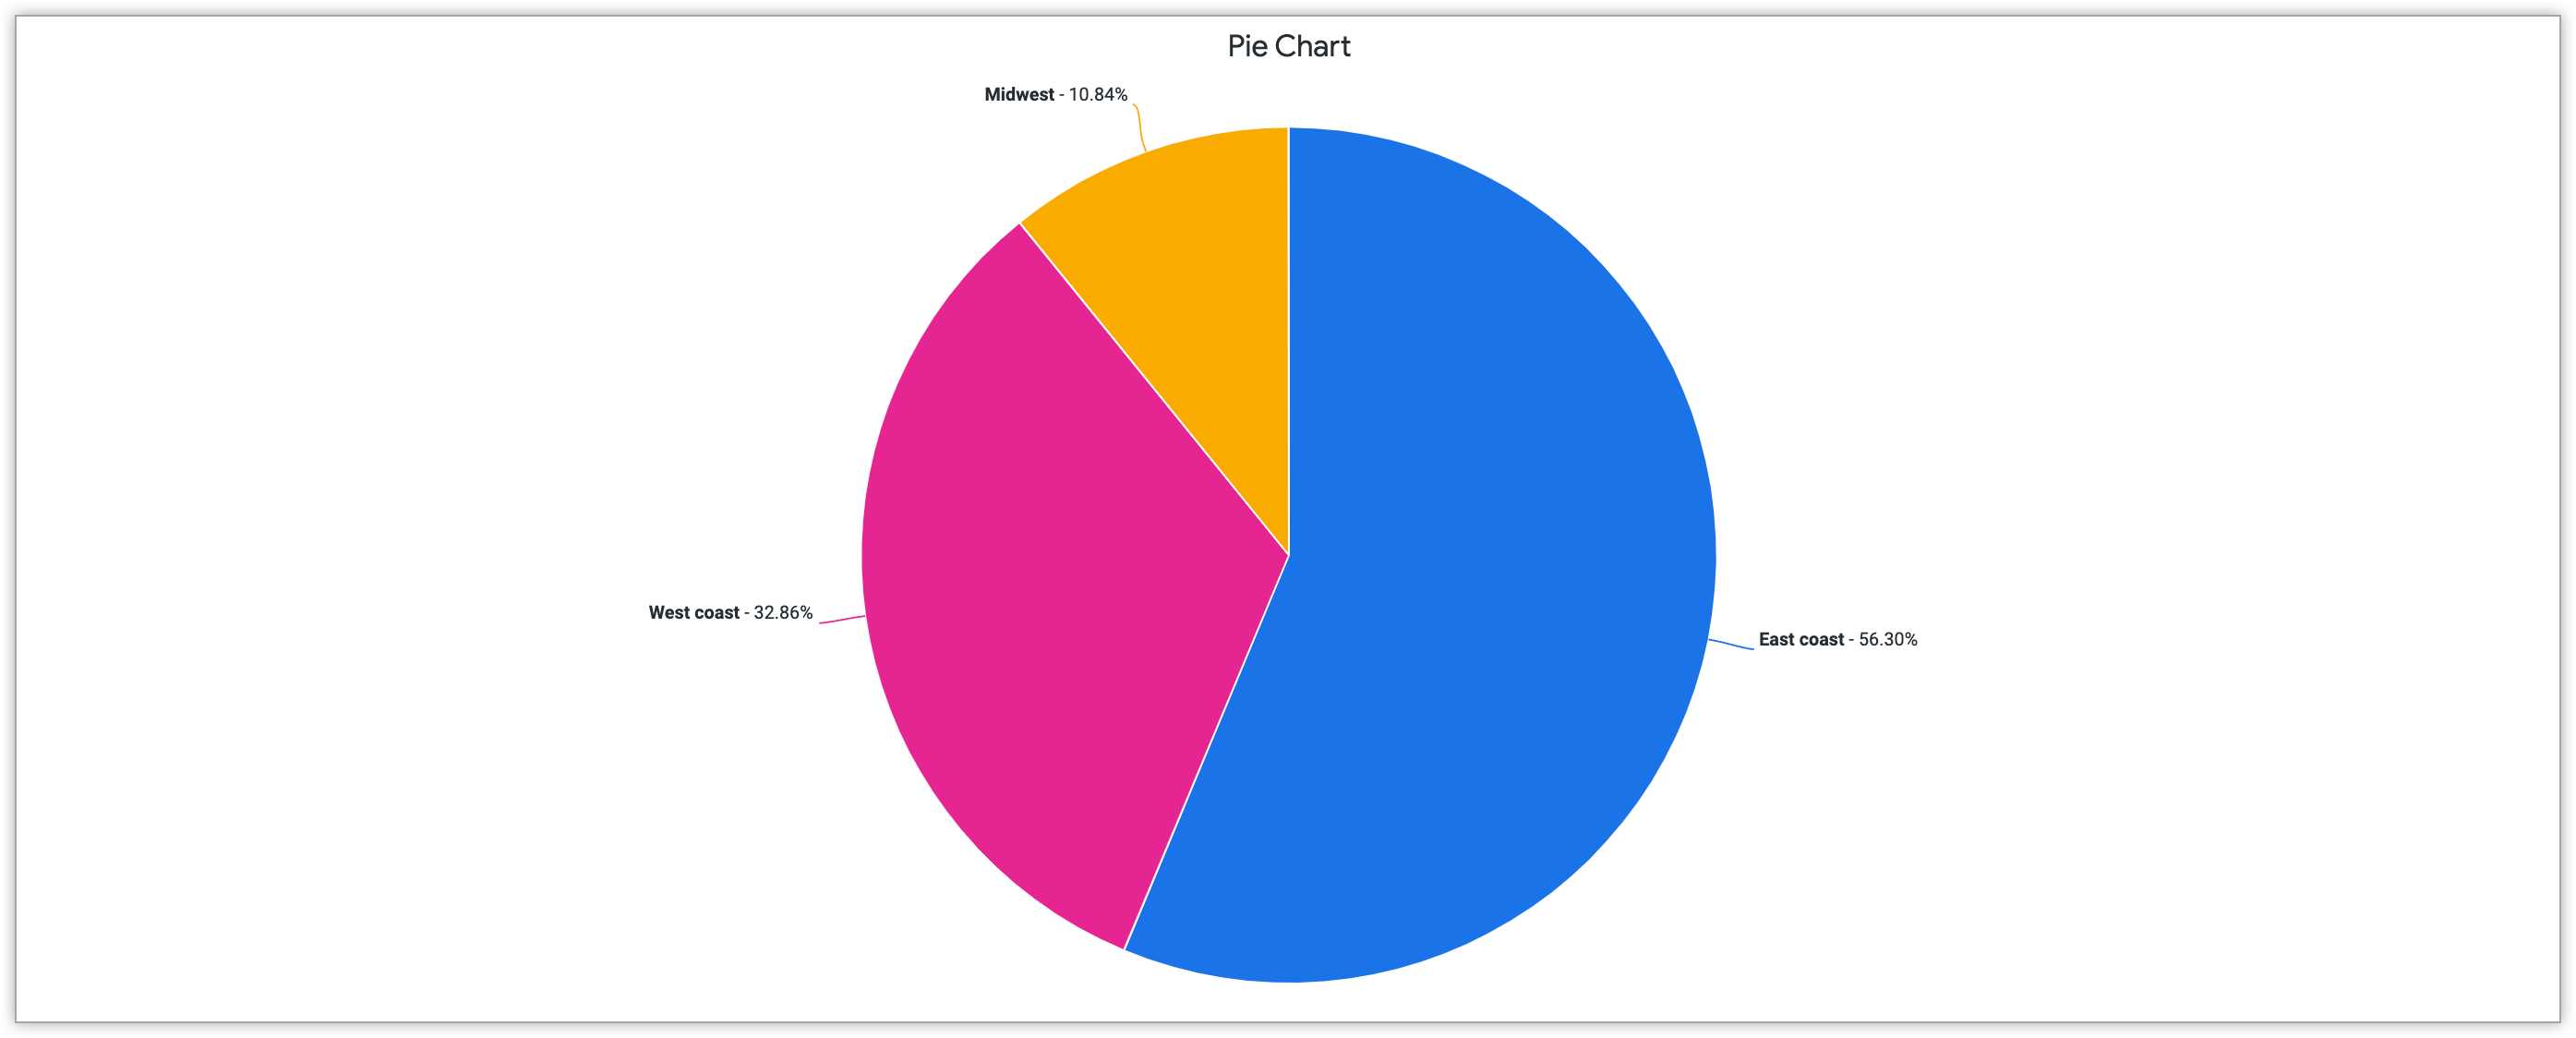 Pie chart of total customers from the East Coast, Midwest, and West Coast.